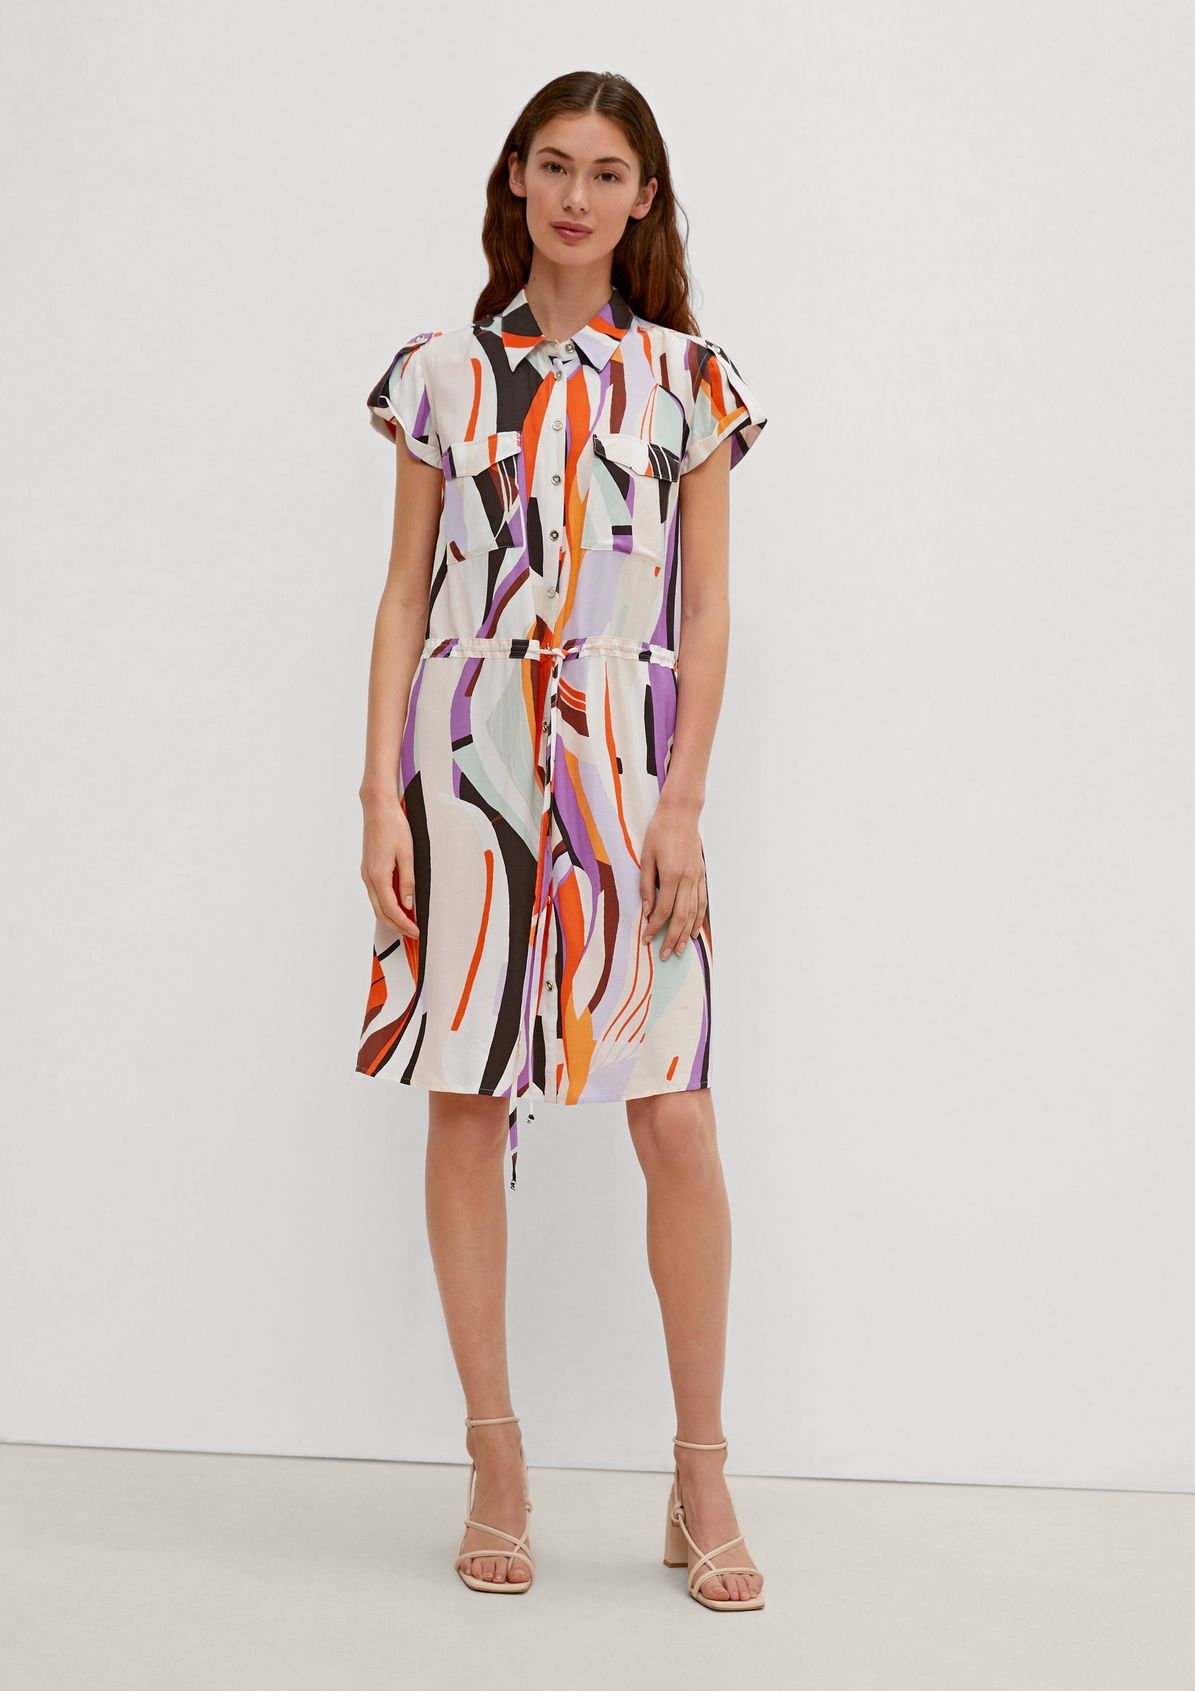 Viscose blouse dress from comma